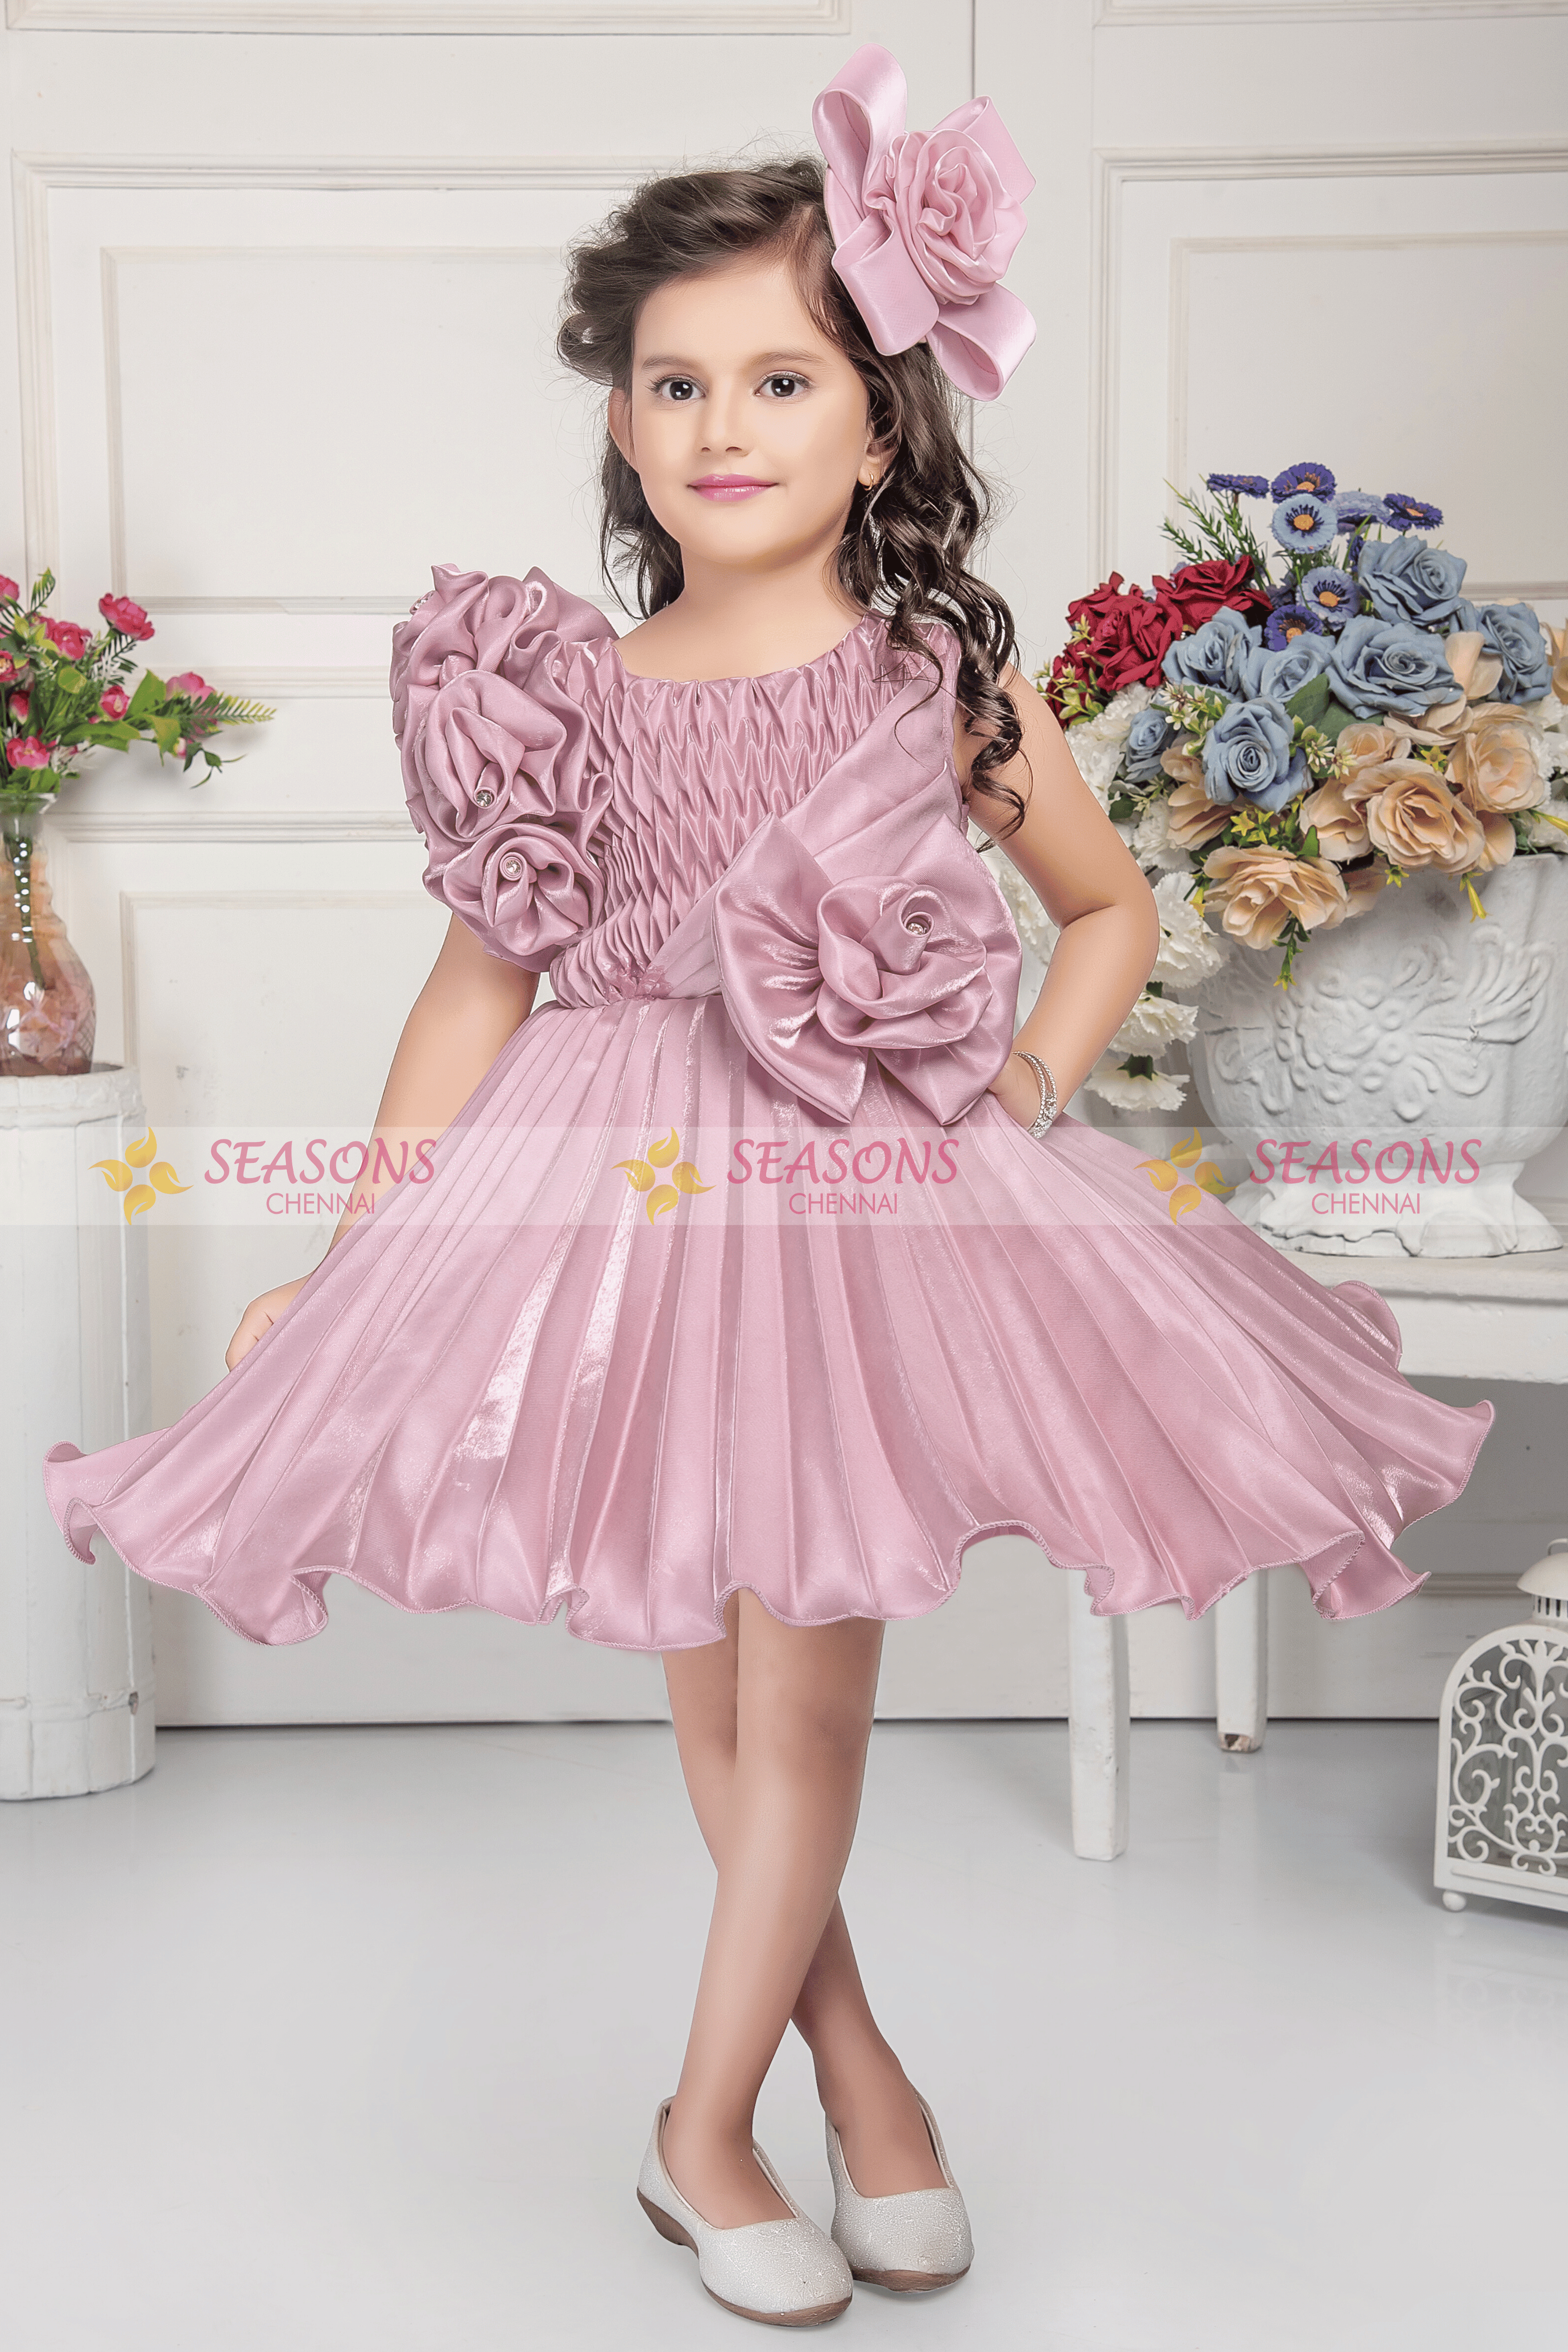 Buy NORAME Baby Girls Dress Cute Short Sleeves Pink Chiffon Skirts  (4T(4-5Years), Pink) at Amazon.in